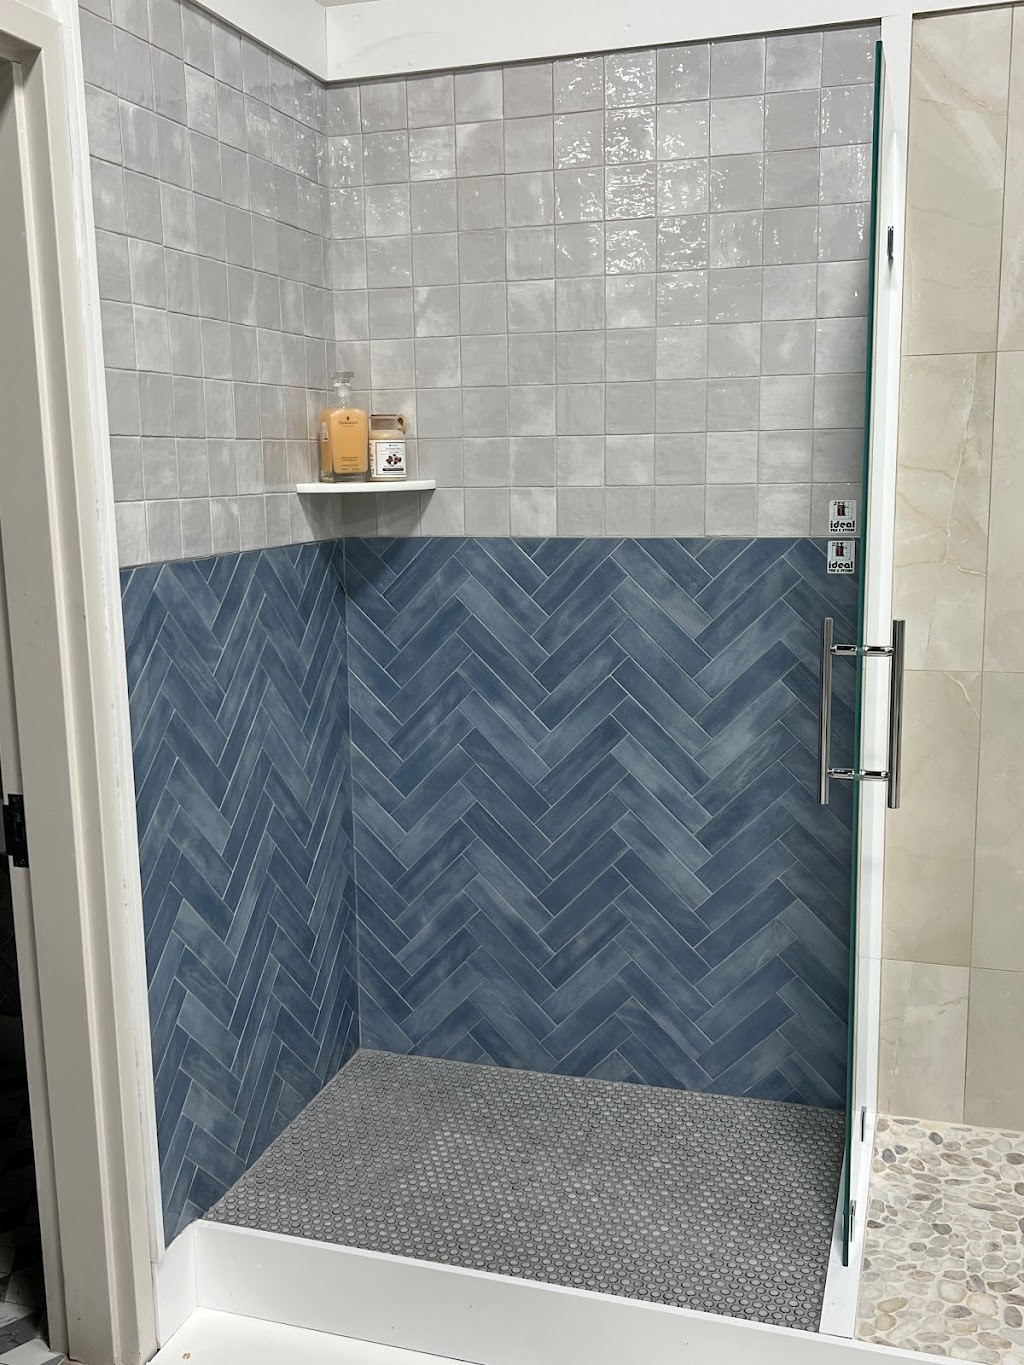 Ideal Tile of Freehold | 4345 US-9, Freehold, NJ 07728 | Phone: (732) 462-0315